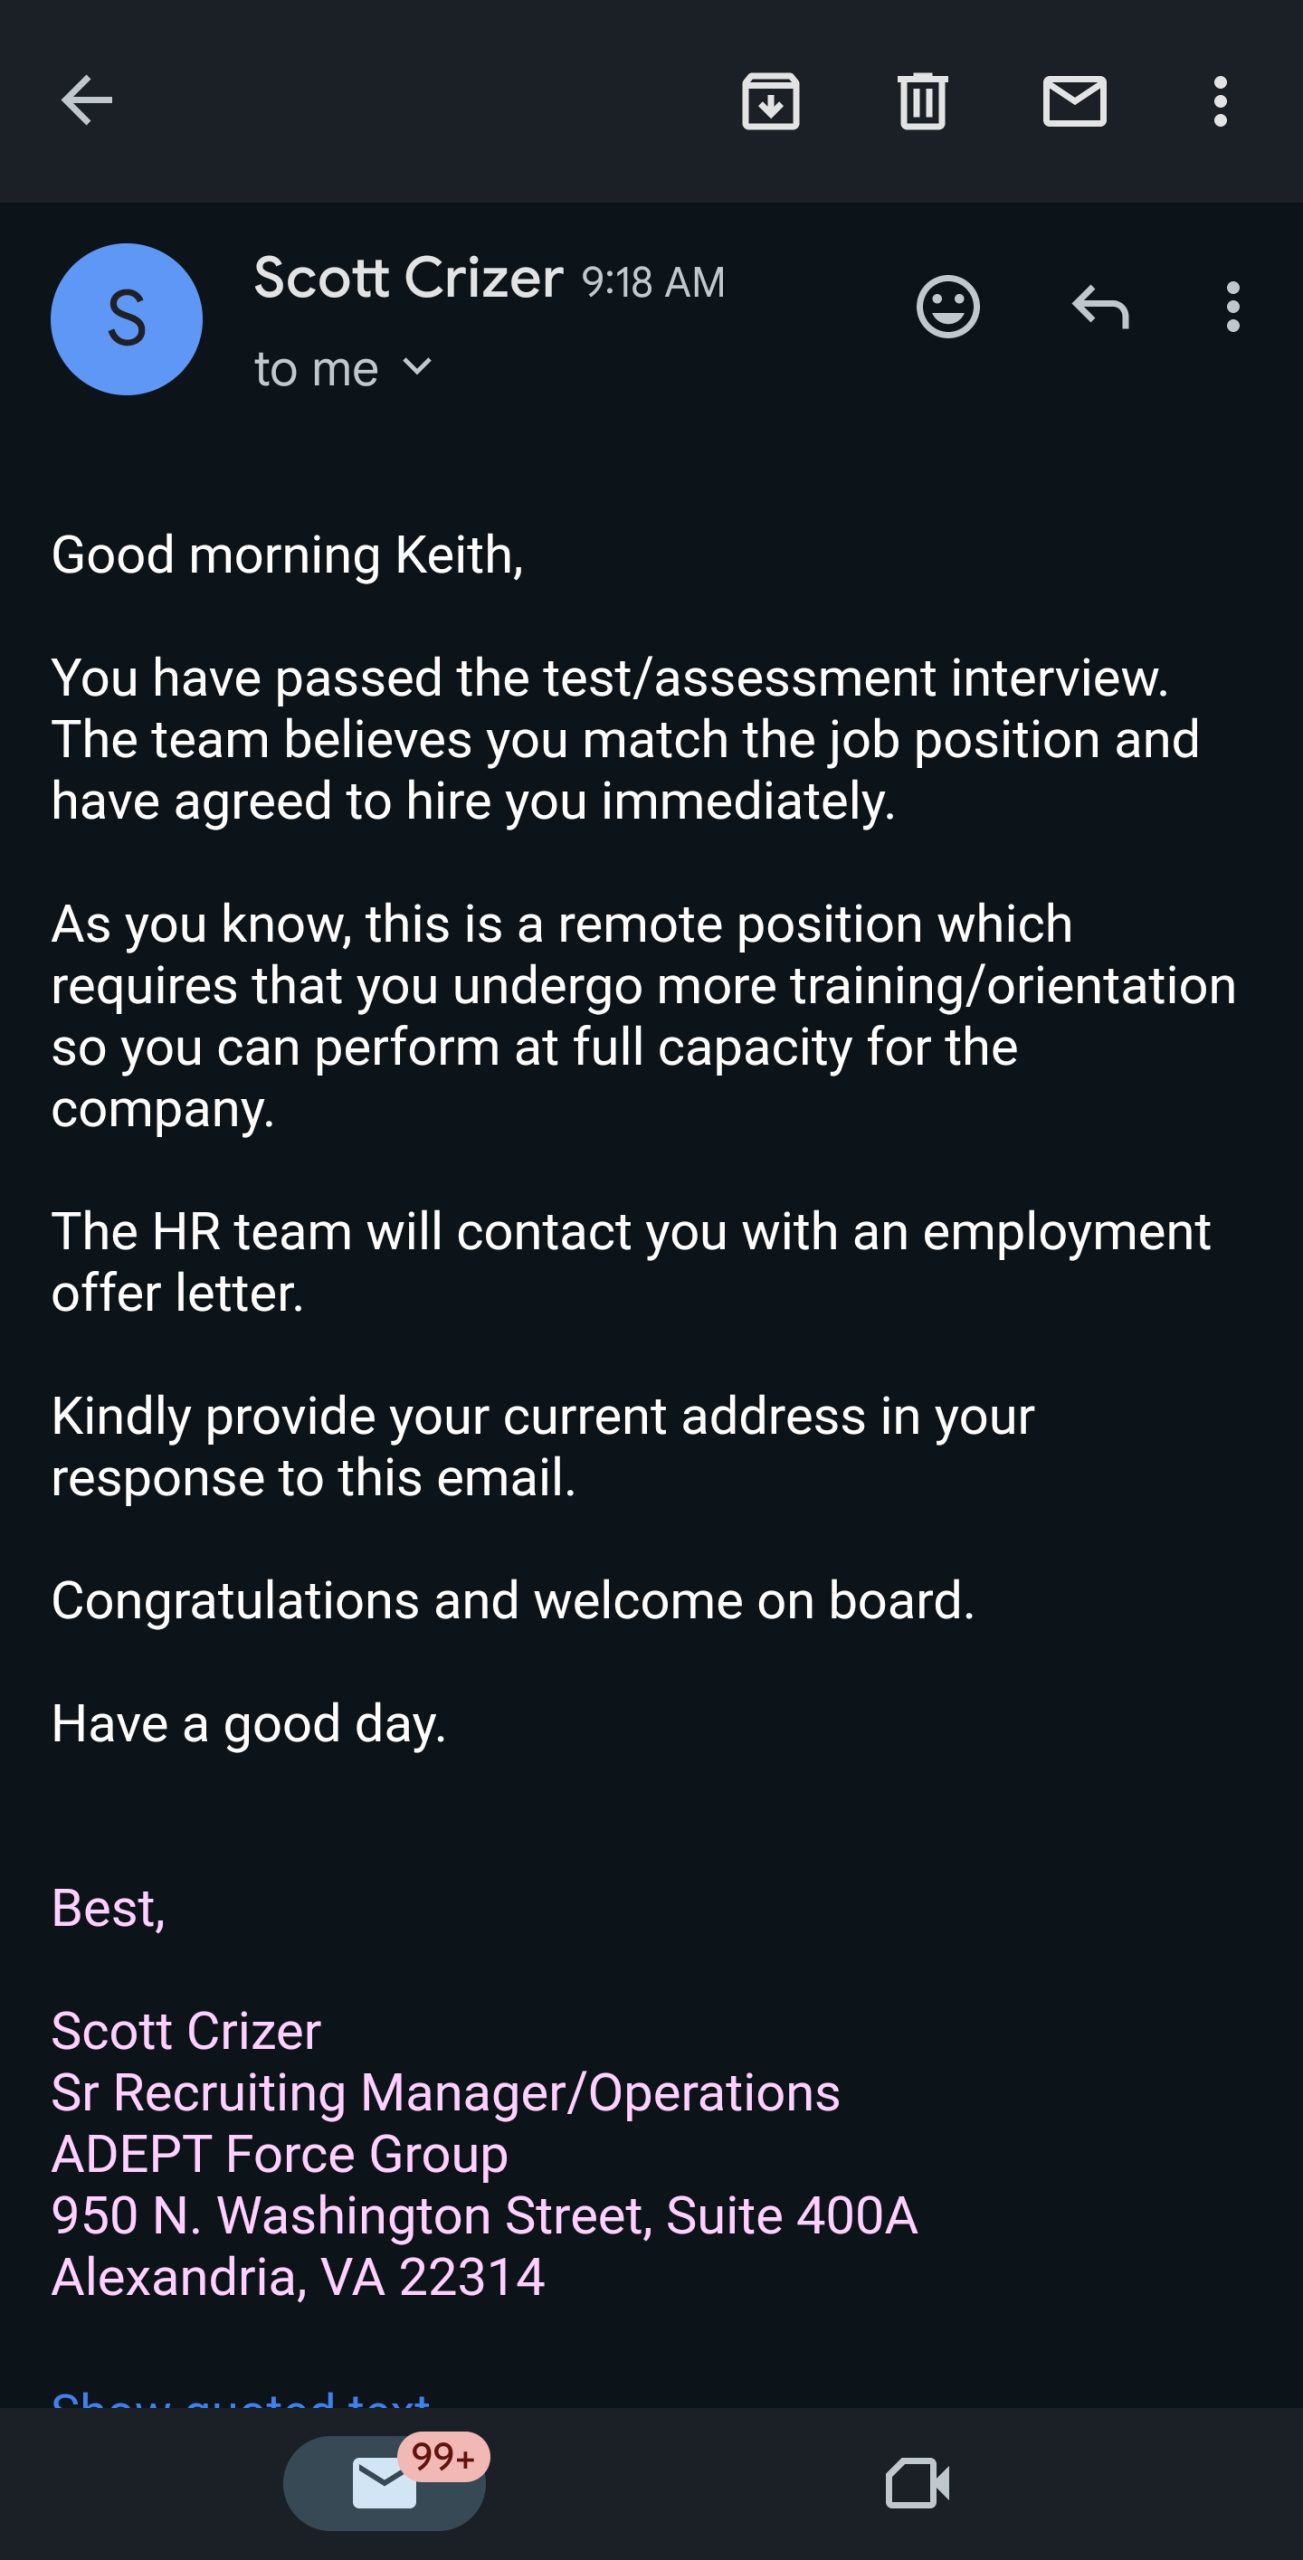 LinkedIn Email Job Scam Continues